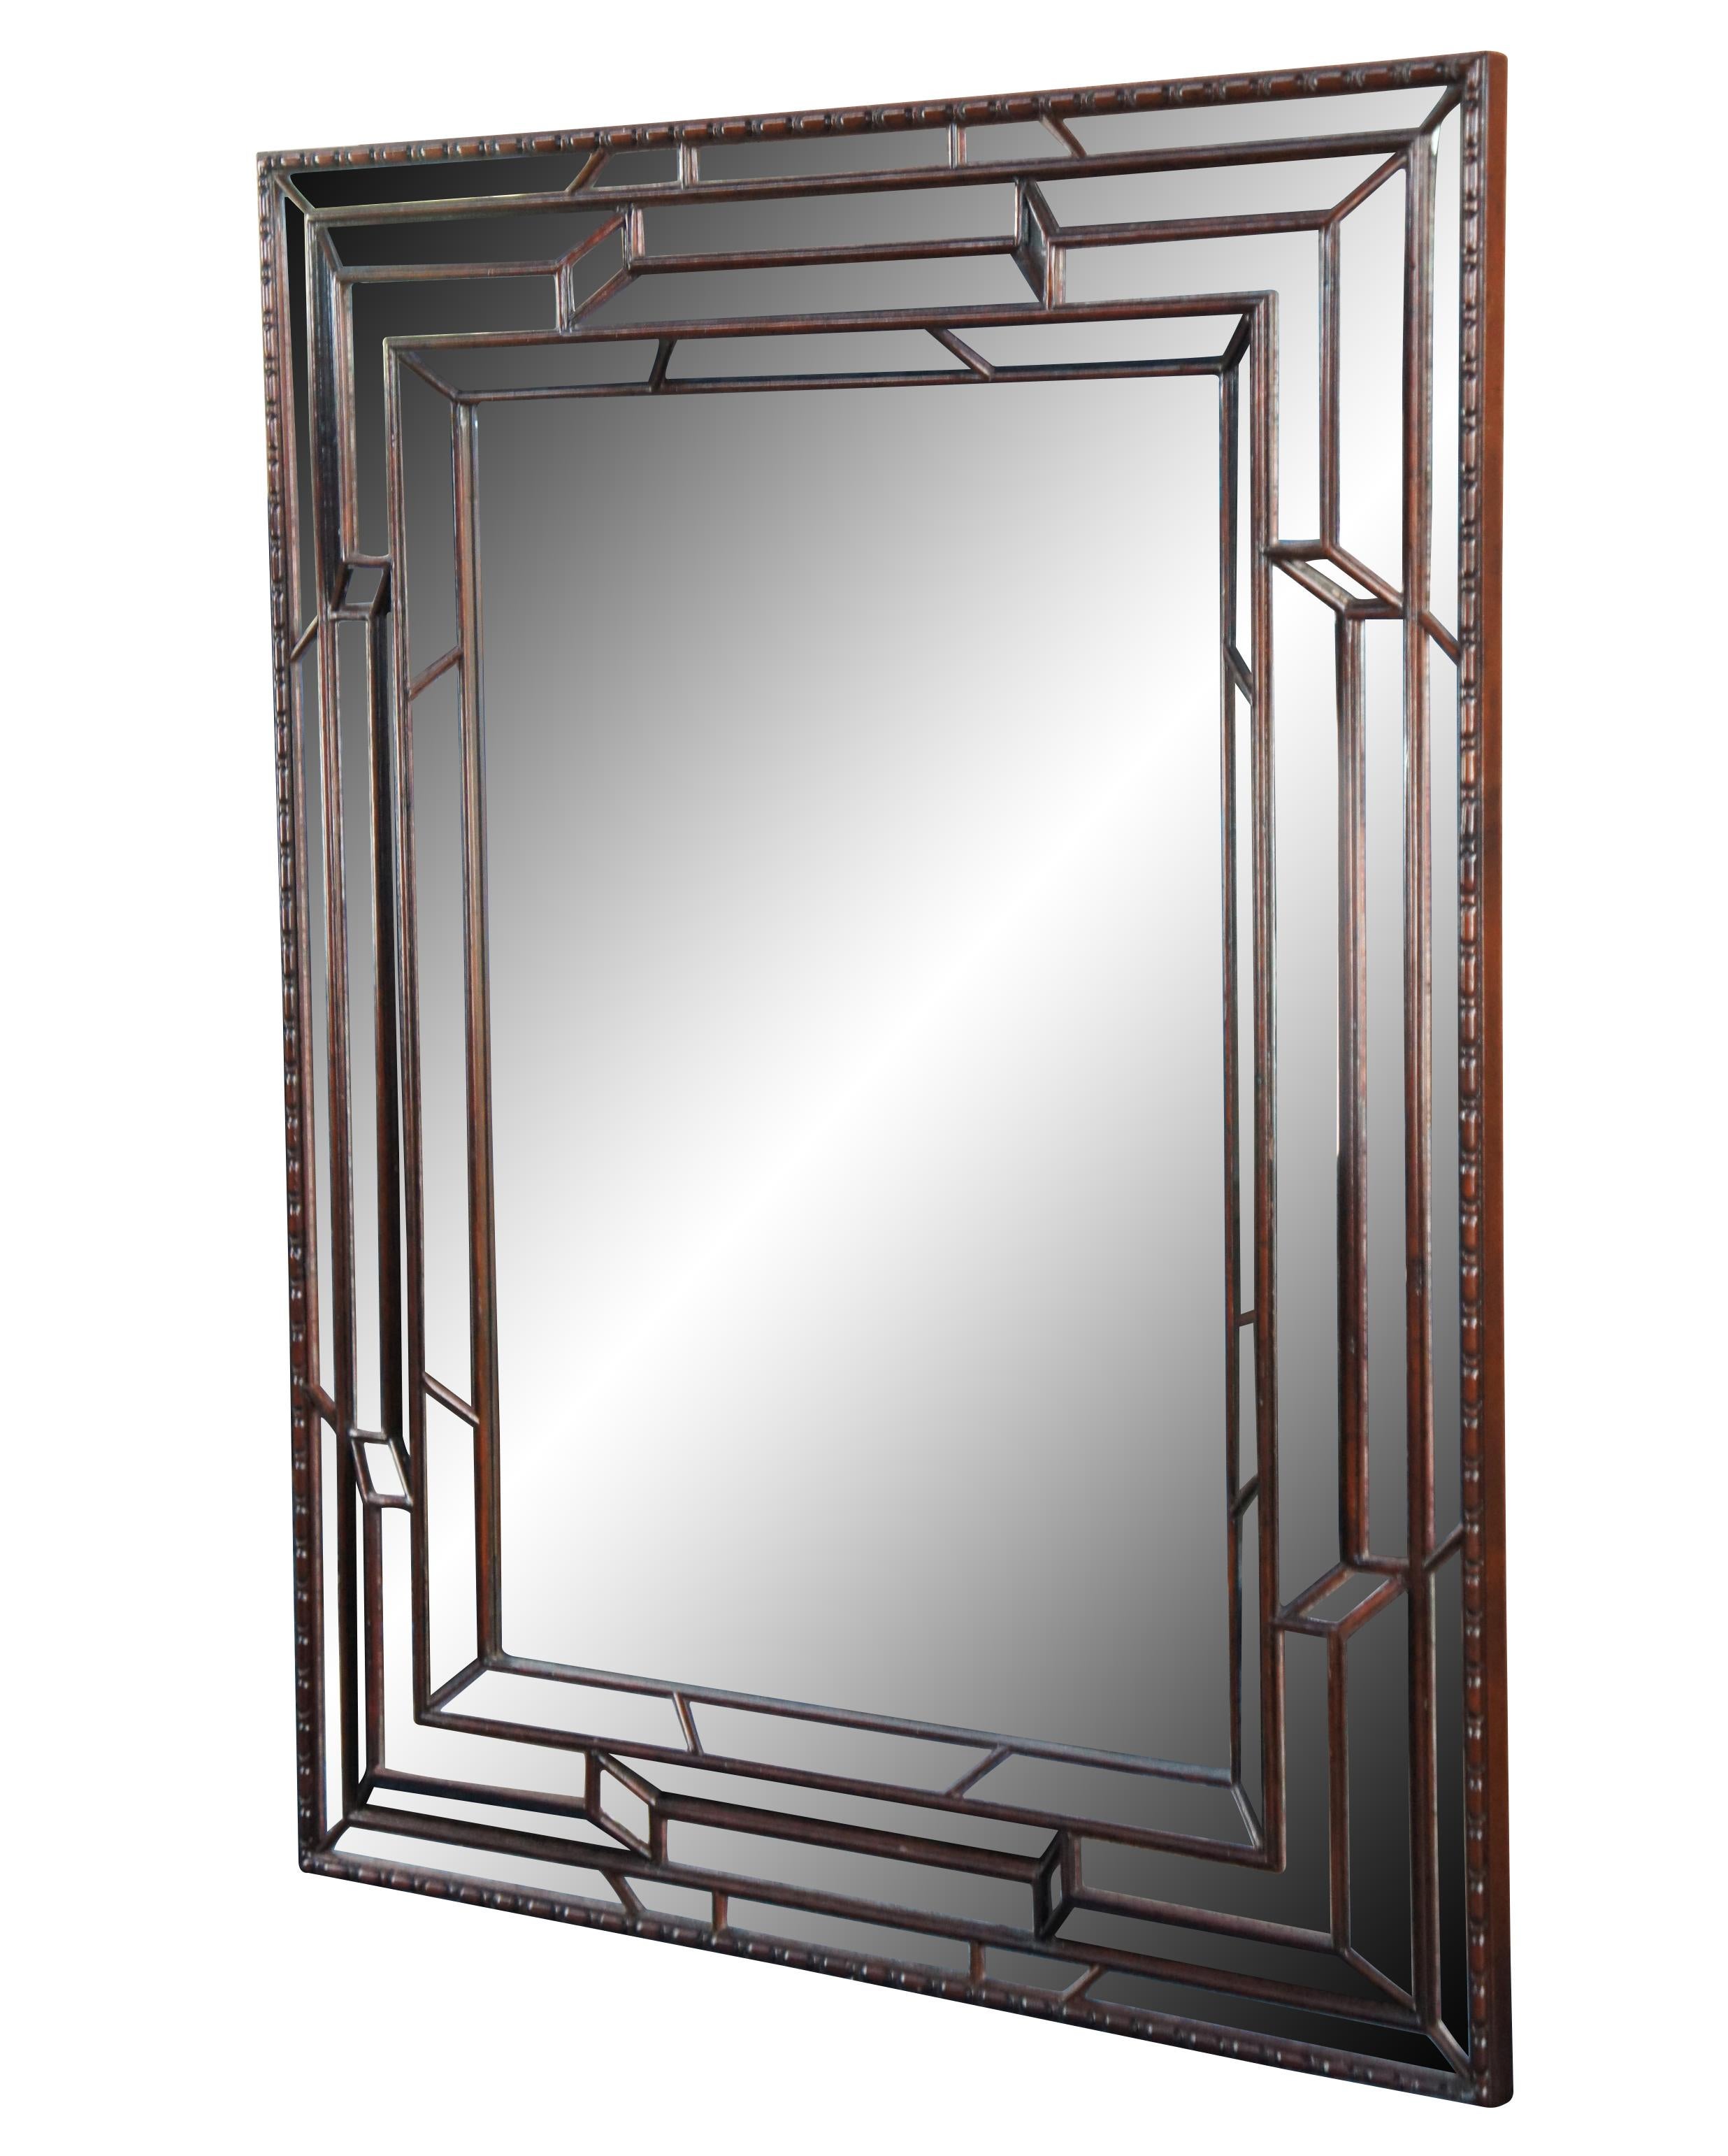 Vintage Theodore Alexander Pavlovsk Collection mirror. Made of mahogany featuring Art Deco styling with rectangular and with geometric beveled design. Measure: 46